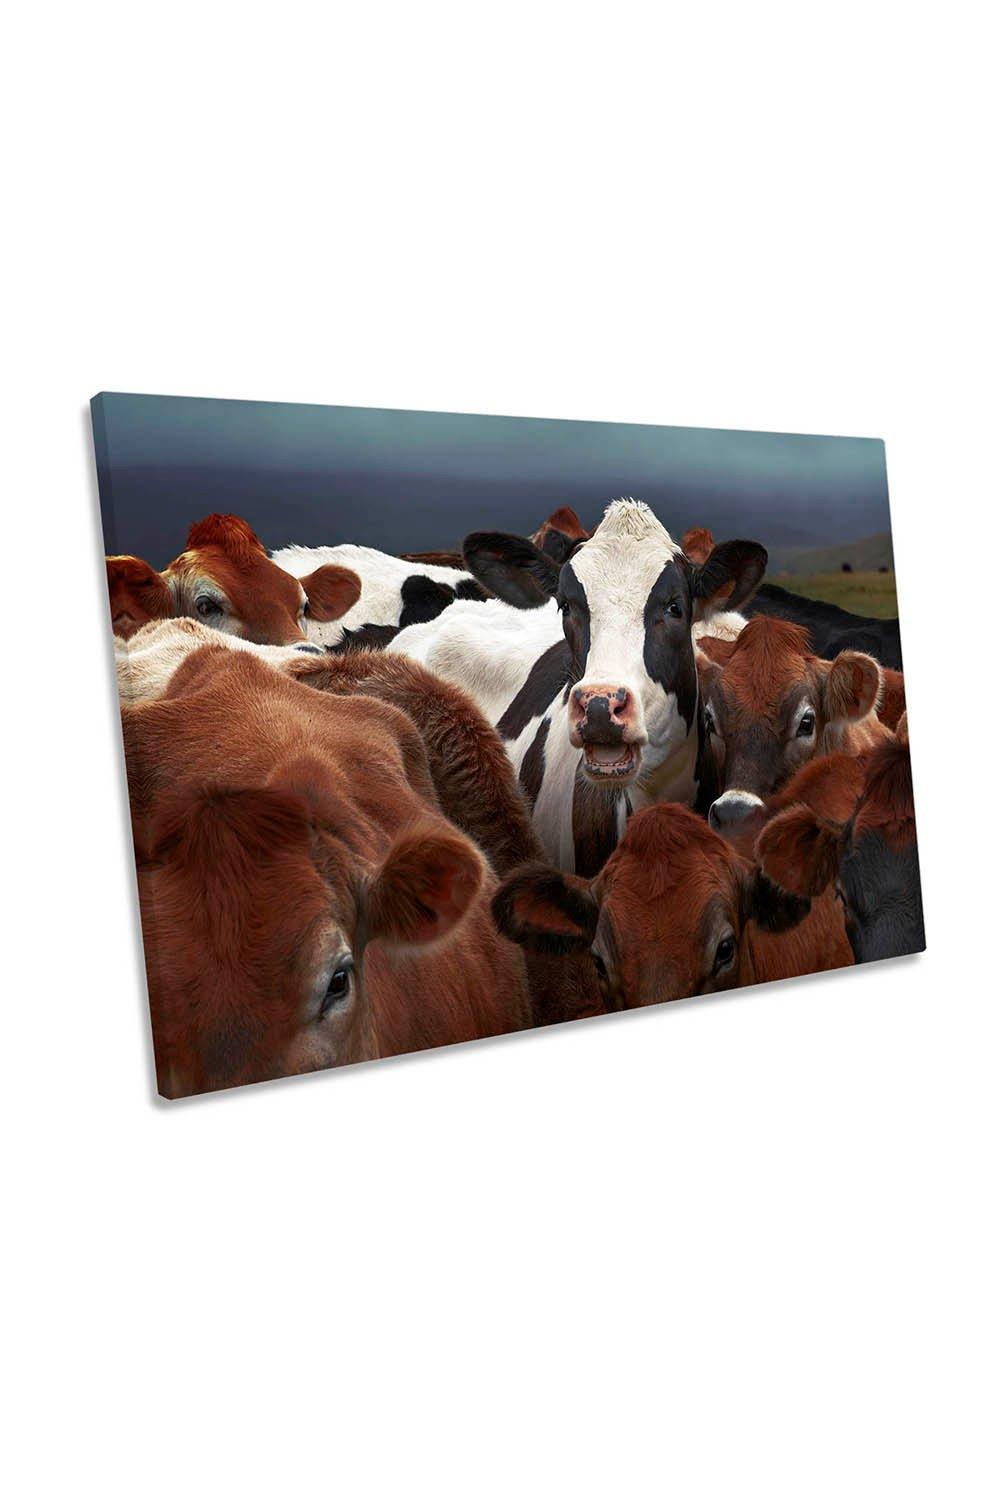 The Laughing Cow on the Farm Canvas Wall Art Picture Print